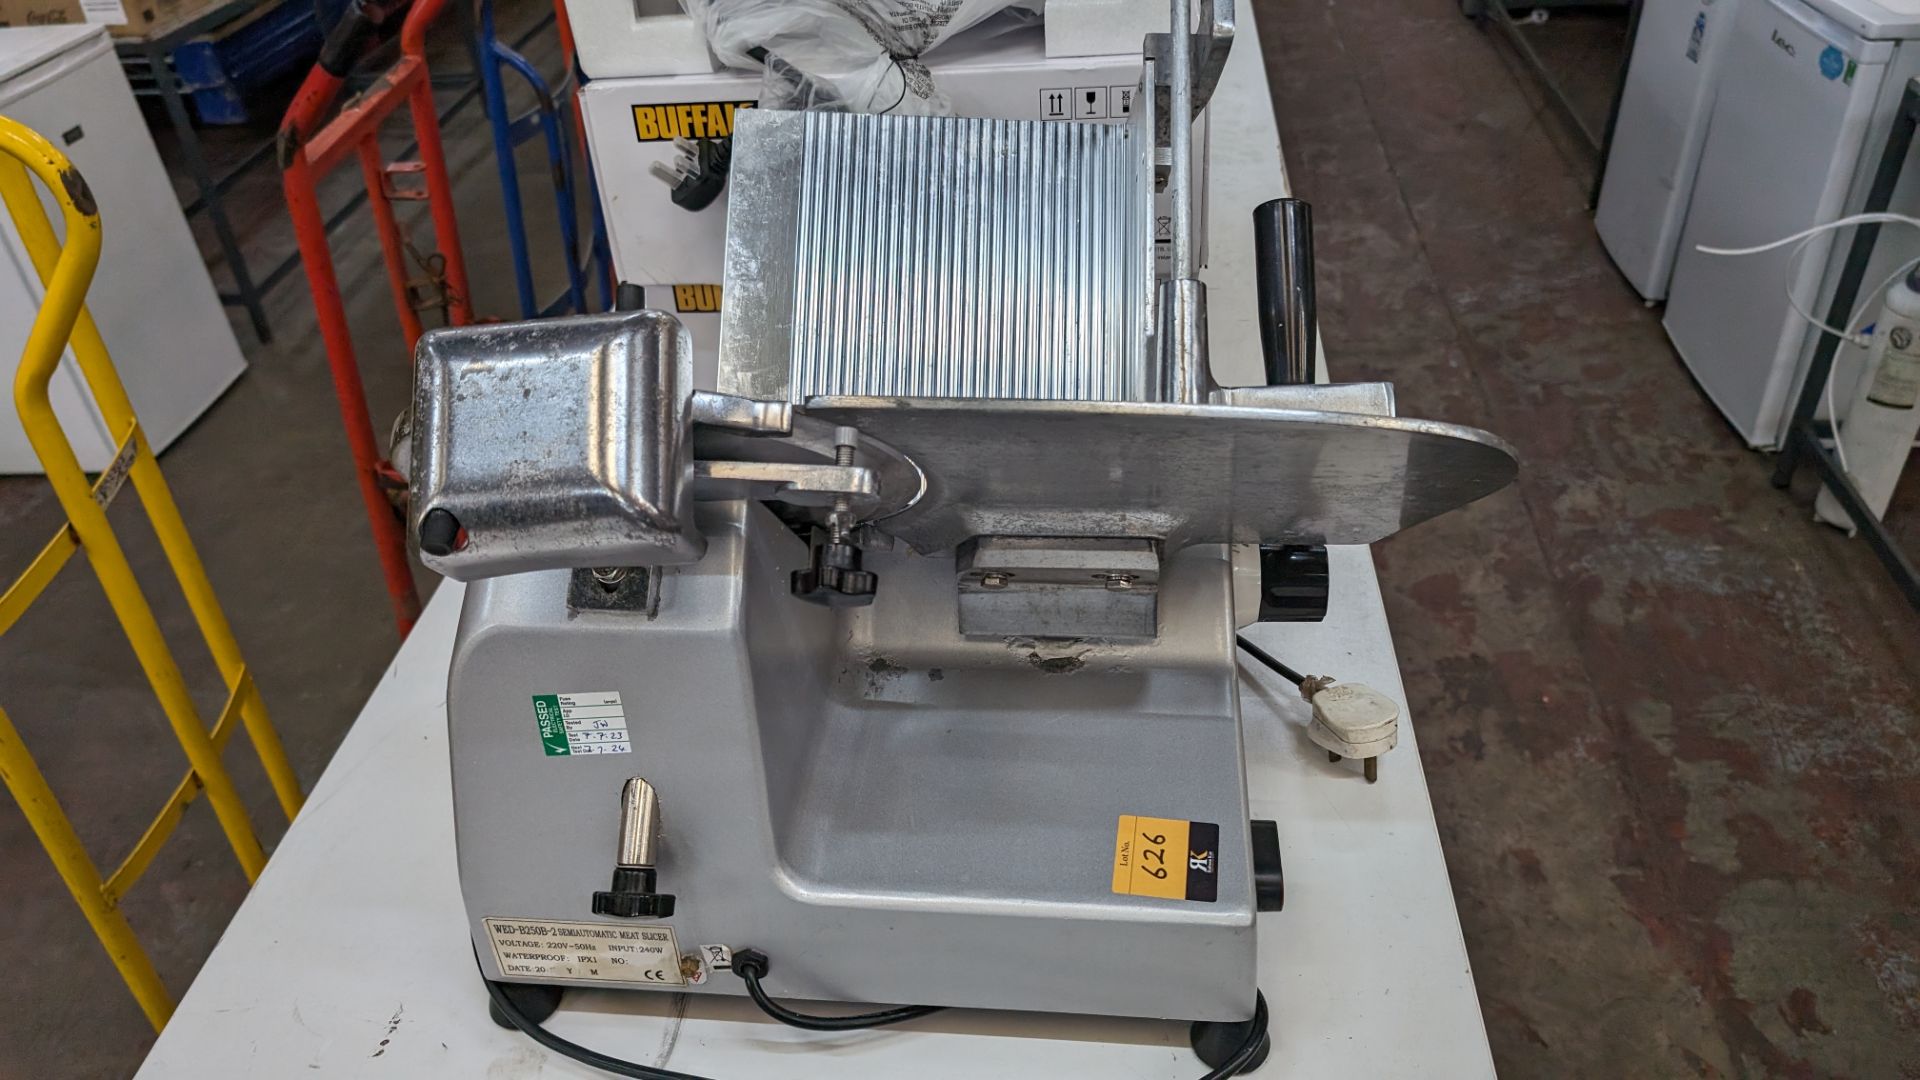 Semi-automatic meat slicer model WED-B250B-2 - Image 5 of 9